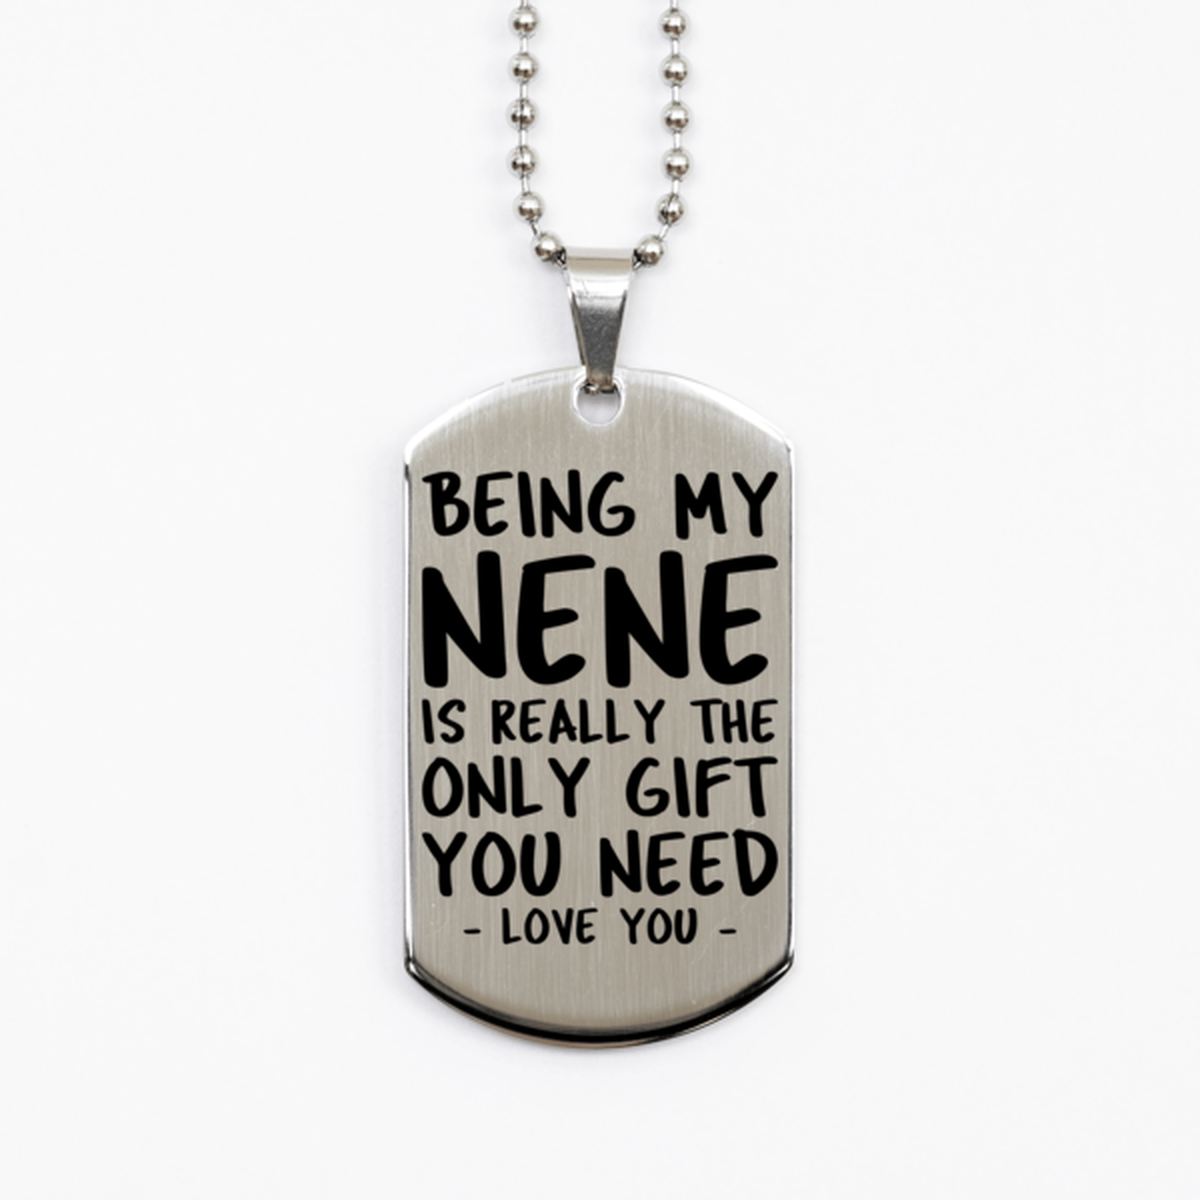 Funny Nene Silver Dog Tag Necklace, Being My Nene Is Really the Only Gift You Need, Best Birthday Gifts for Nene